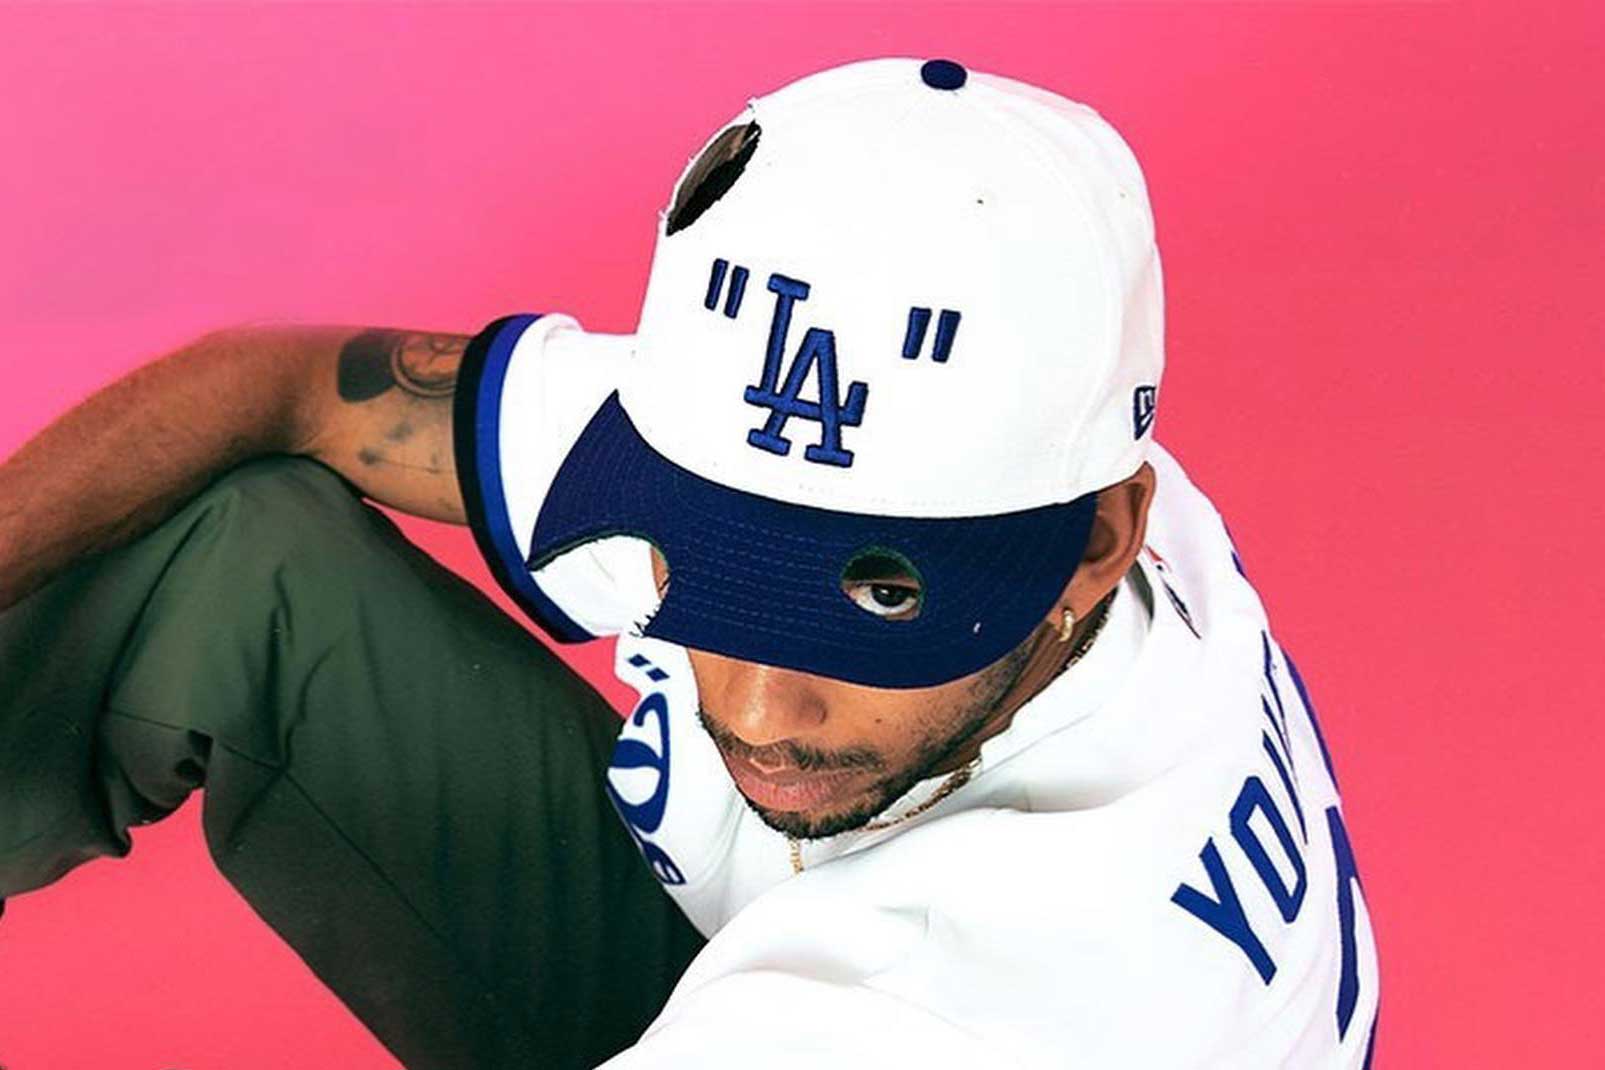 Off-White Is Making $1,100 Baseball Jerseys With Holes in Them